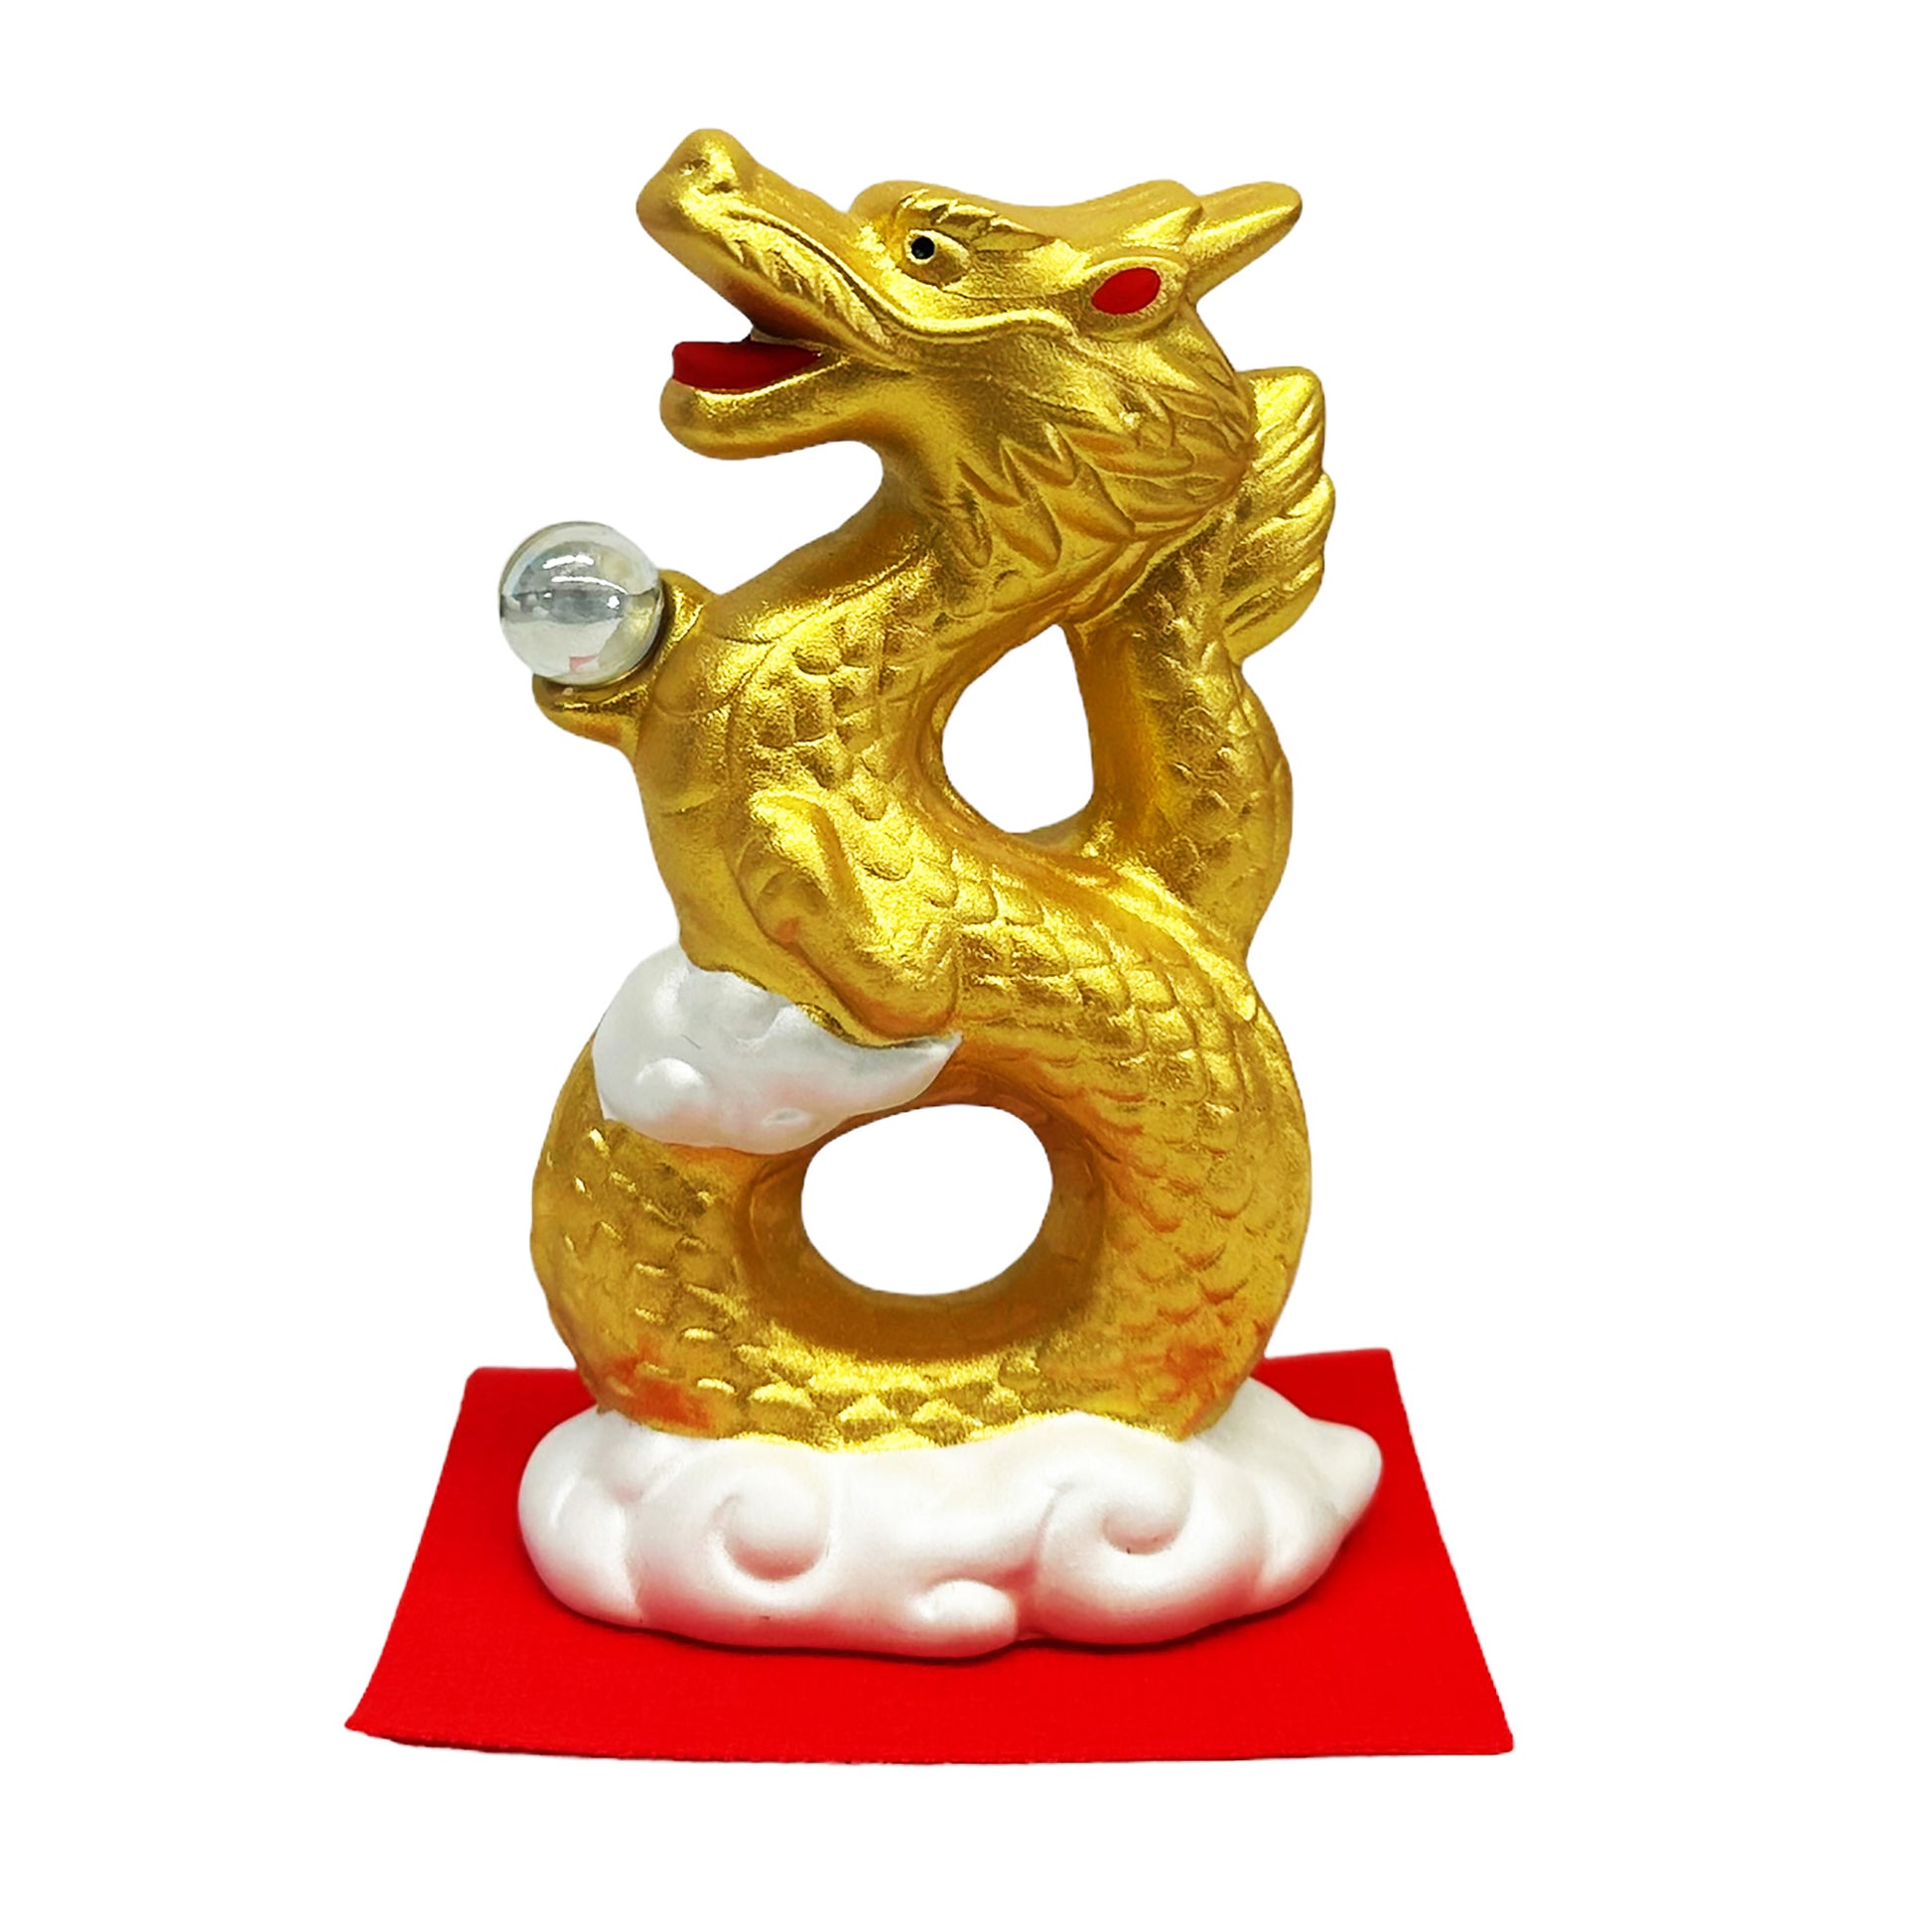 Front graphic image of Golden Dragon Ornament Figurine 4 X 2.5 X 1.5 Inches